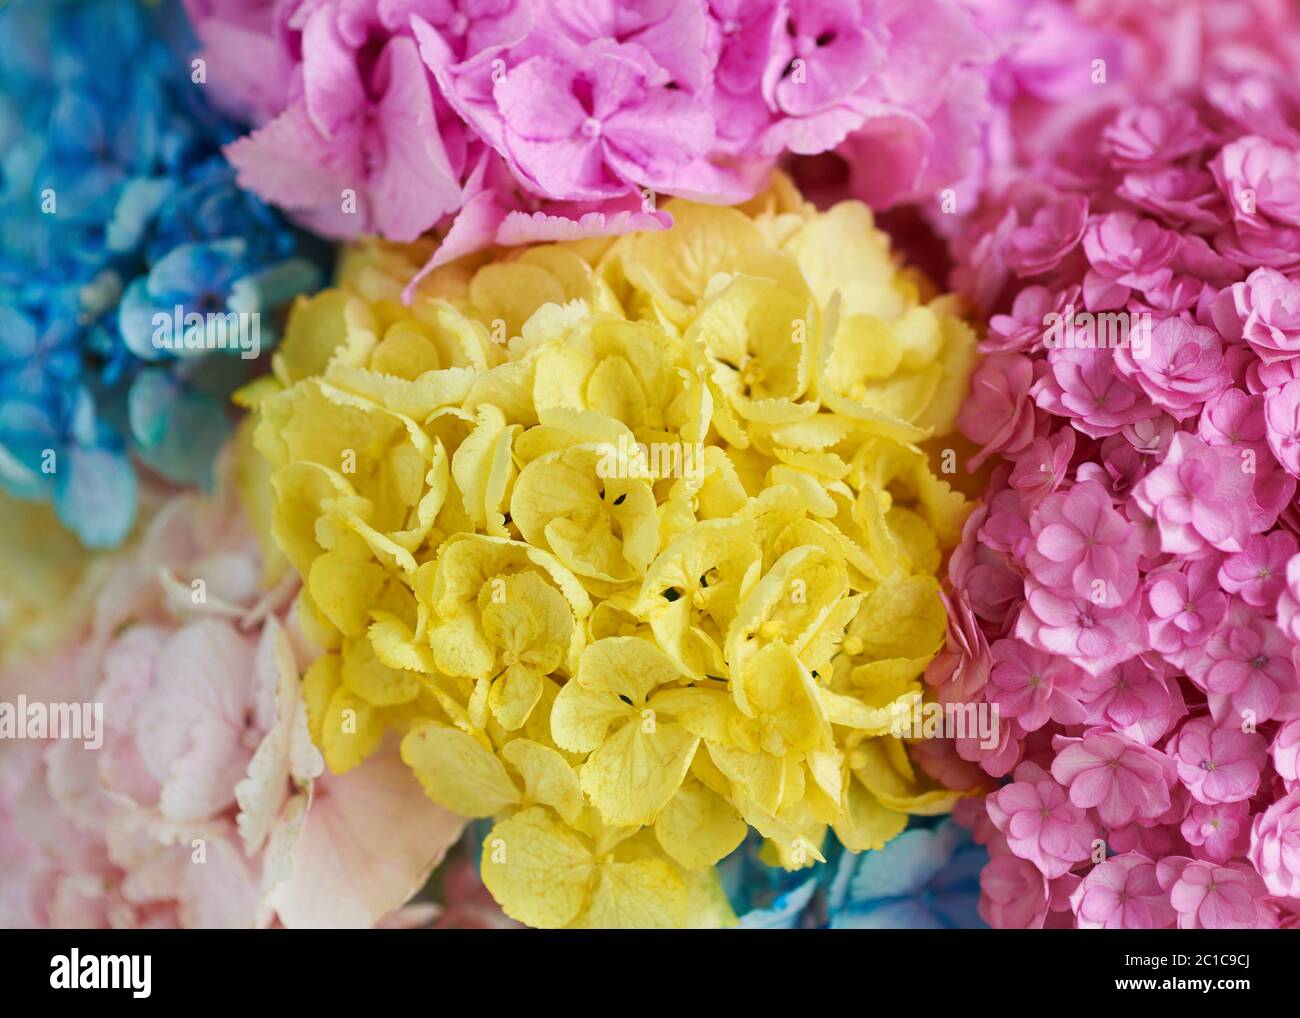 Bouquet of colored flowers peonies. Stock Photo